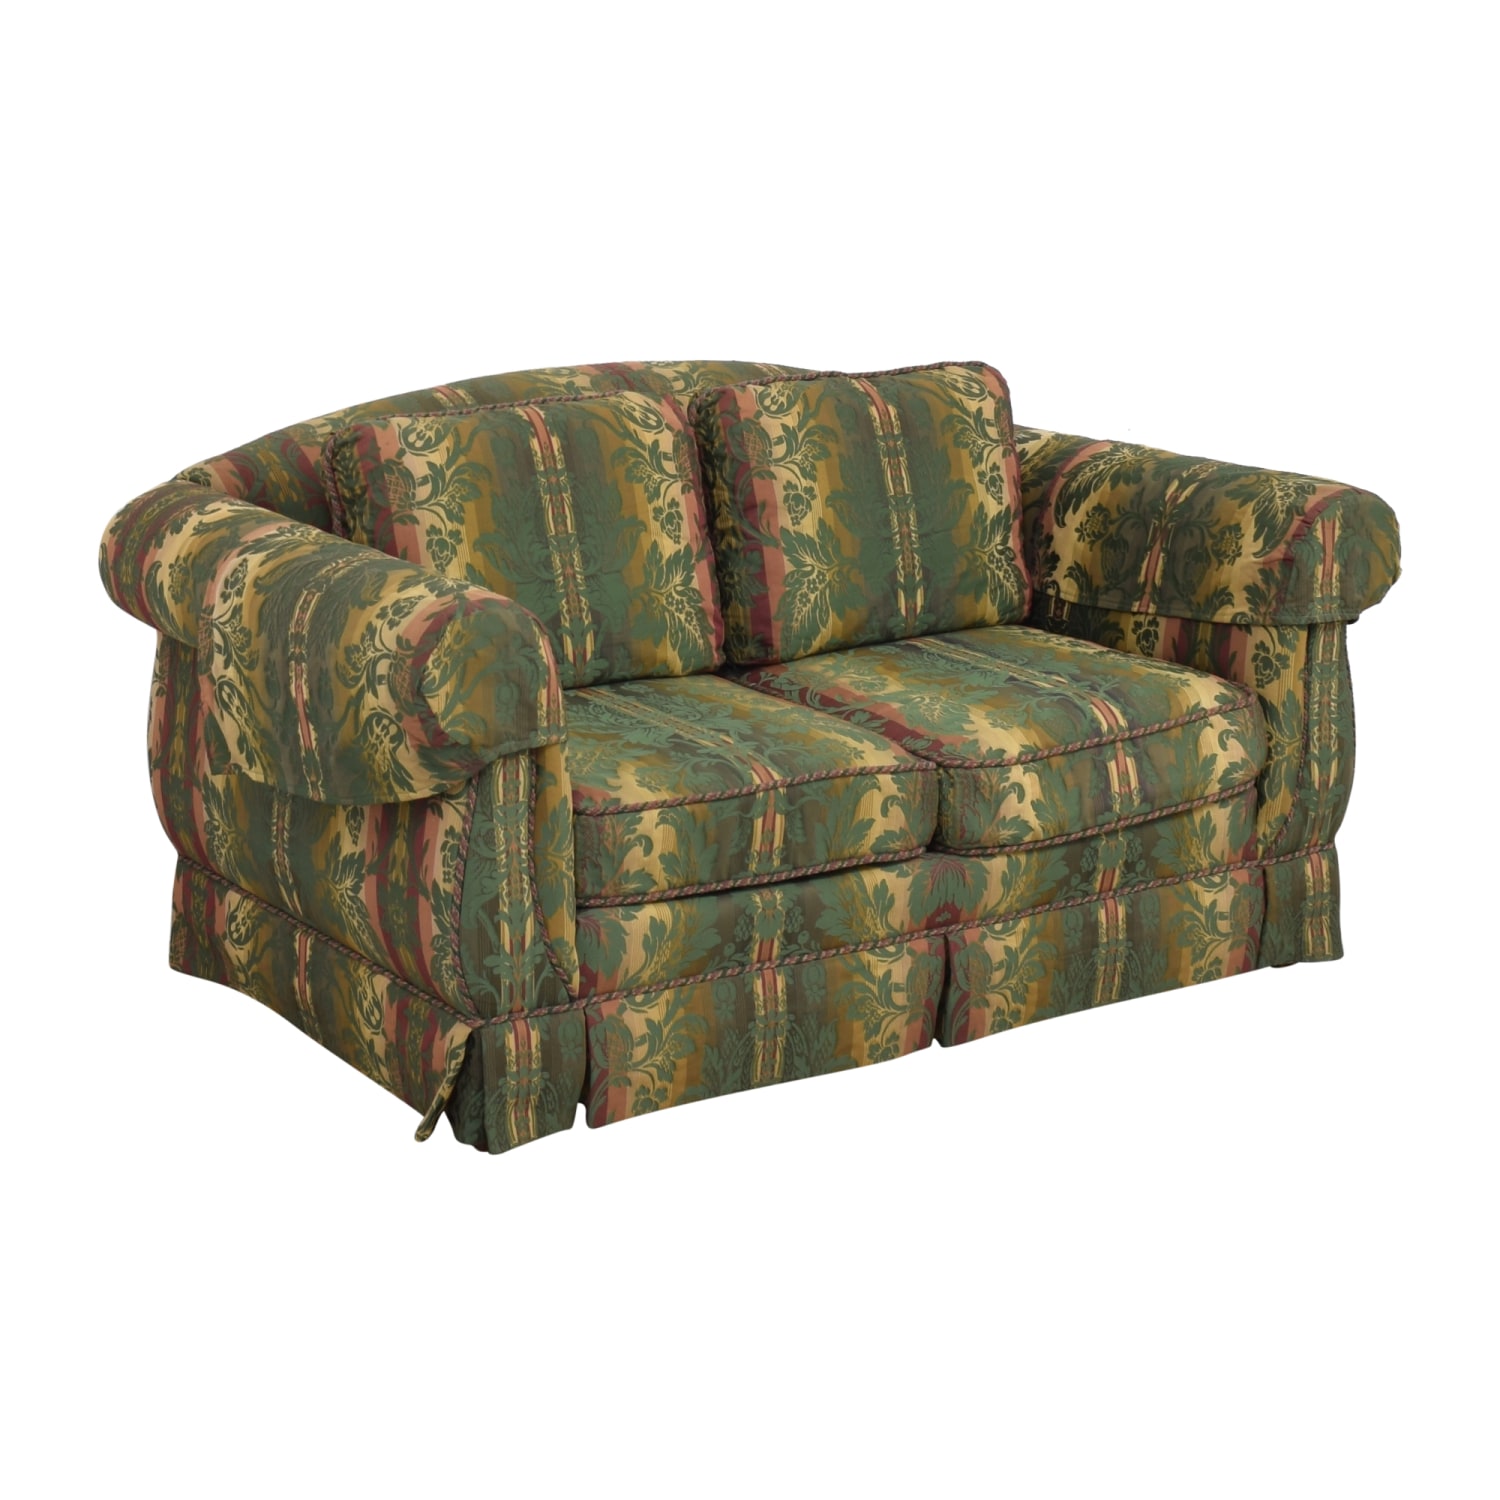 Used Thomasville Patterned Two Cushion Sofa 